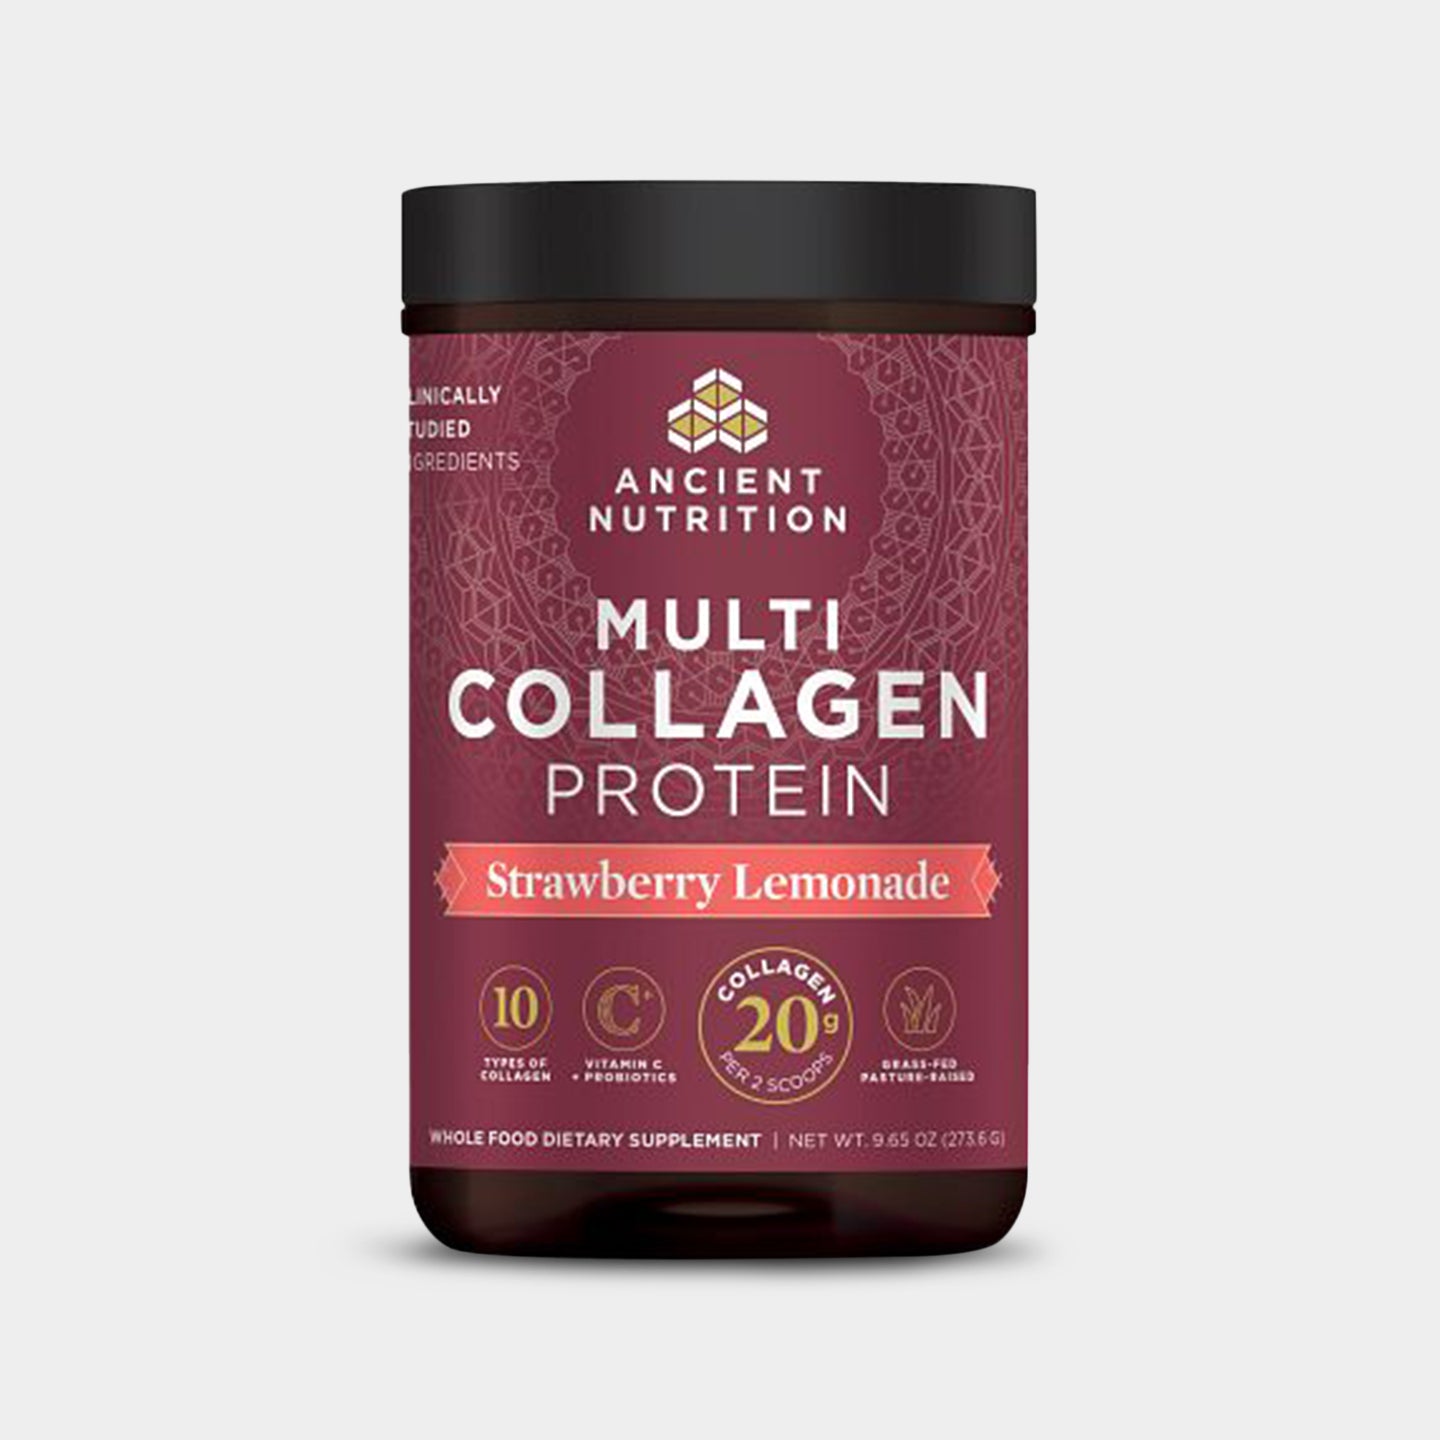 Ancient Nutrition Multi Collagen Protein - 20g, Strawberry Lemonade, 24 Servings A1